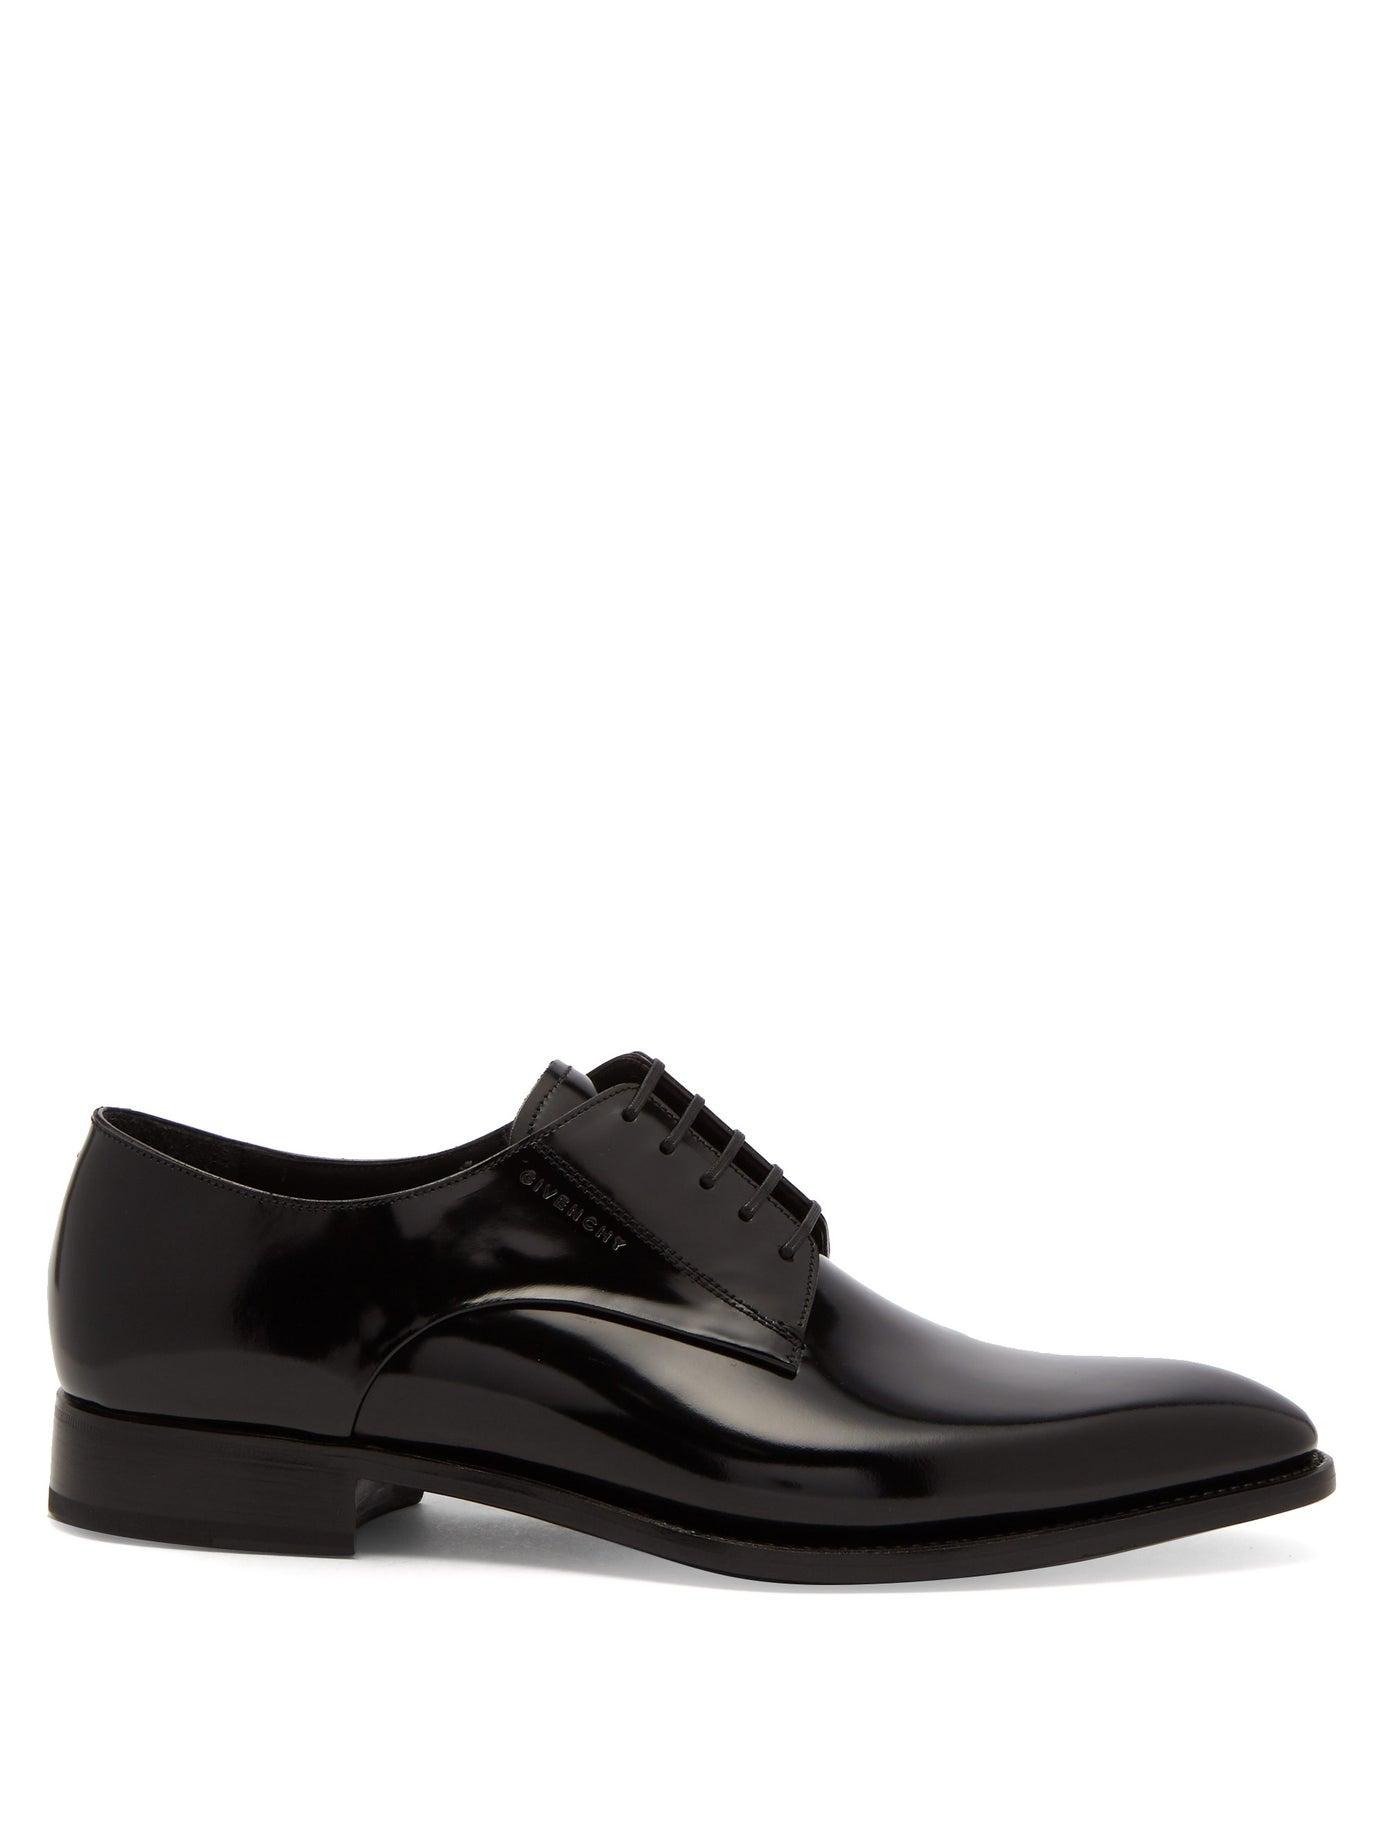 Givenchy Patent-leather Derby Shoes in Black for Men - Lyst